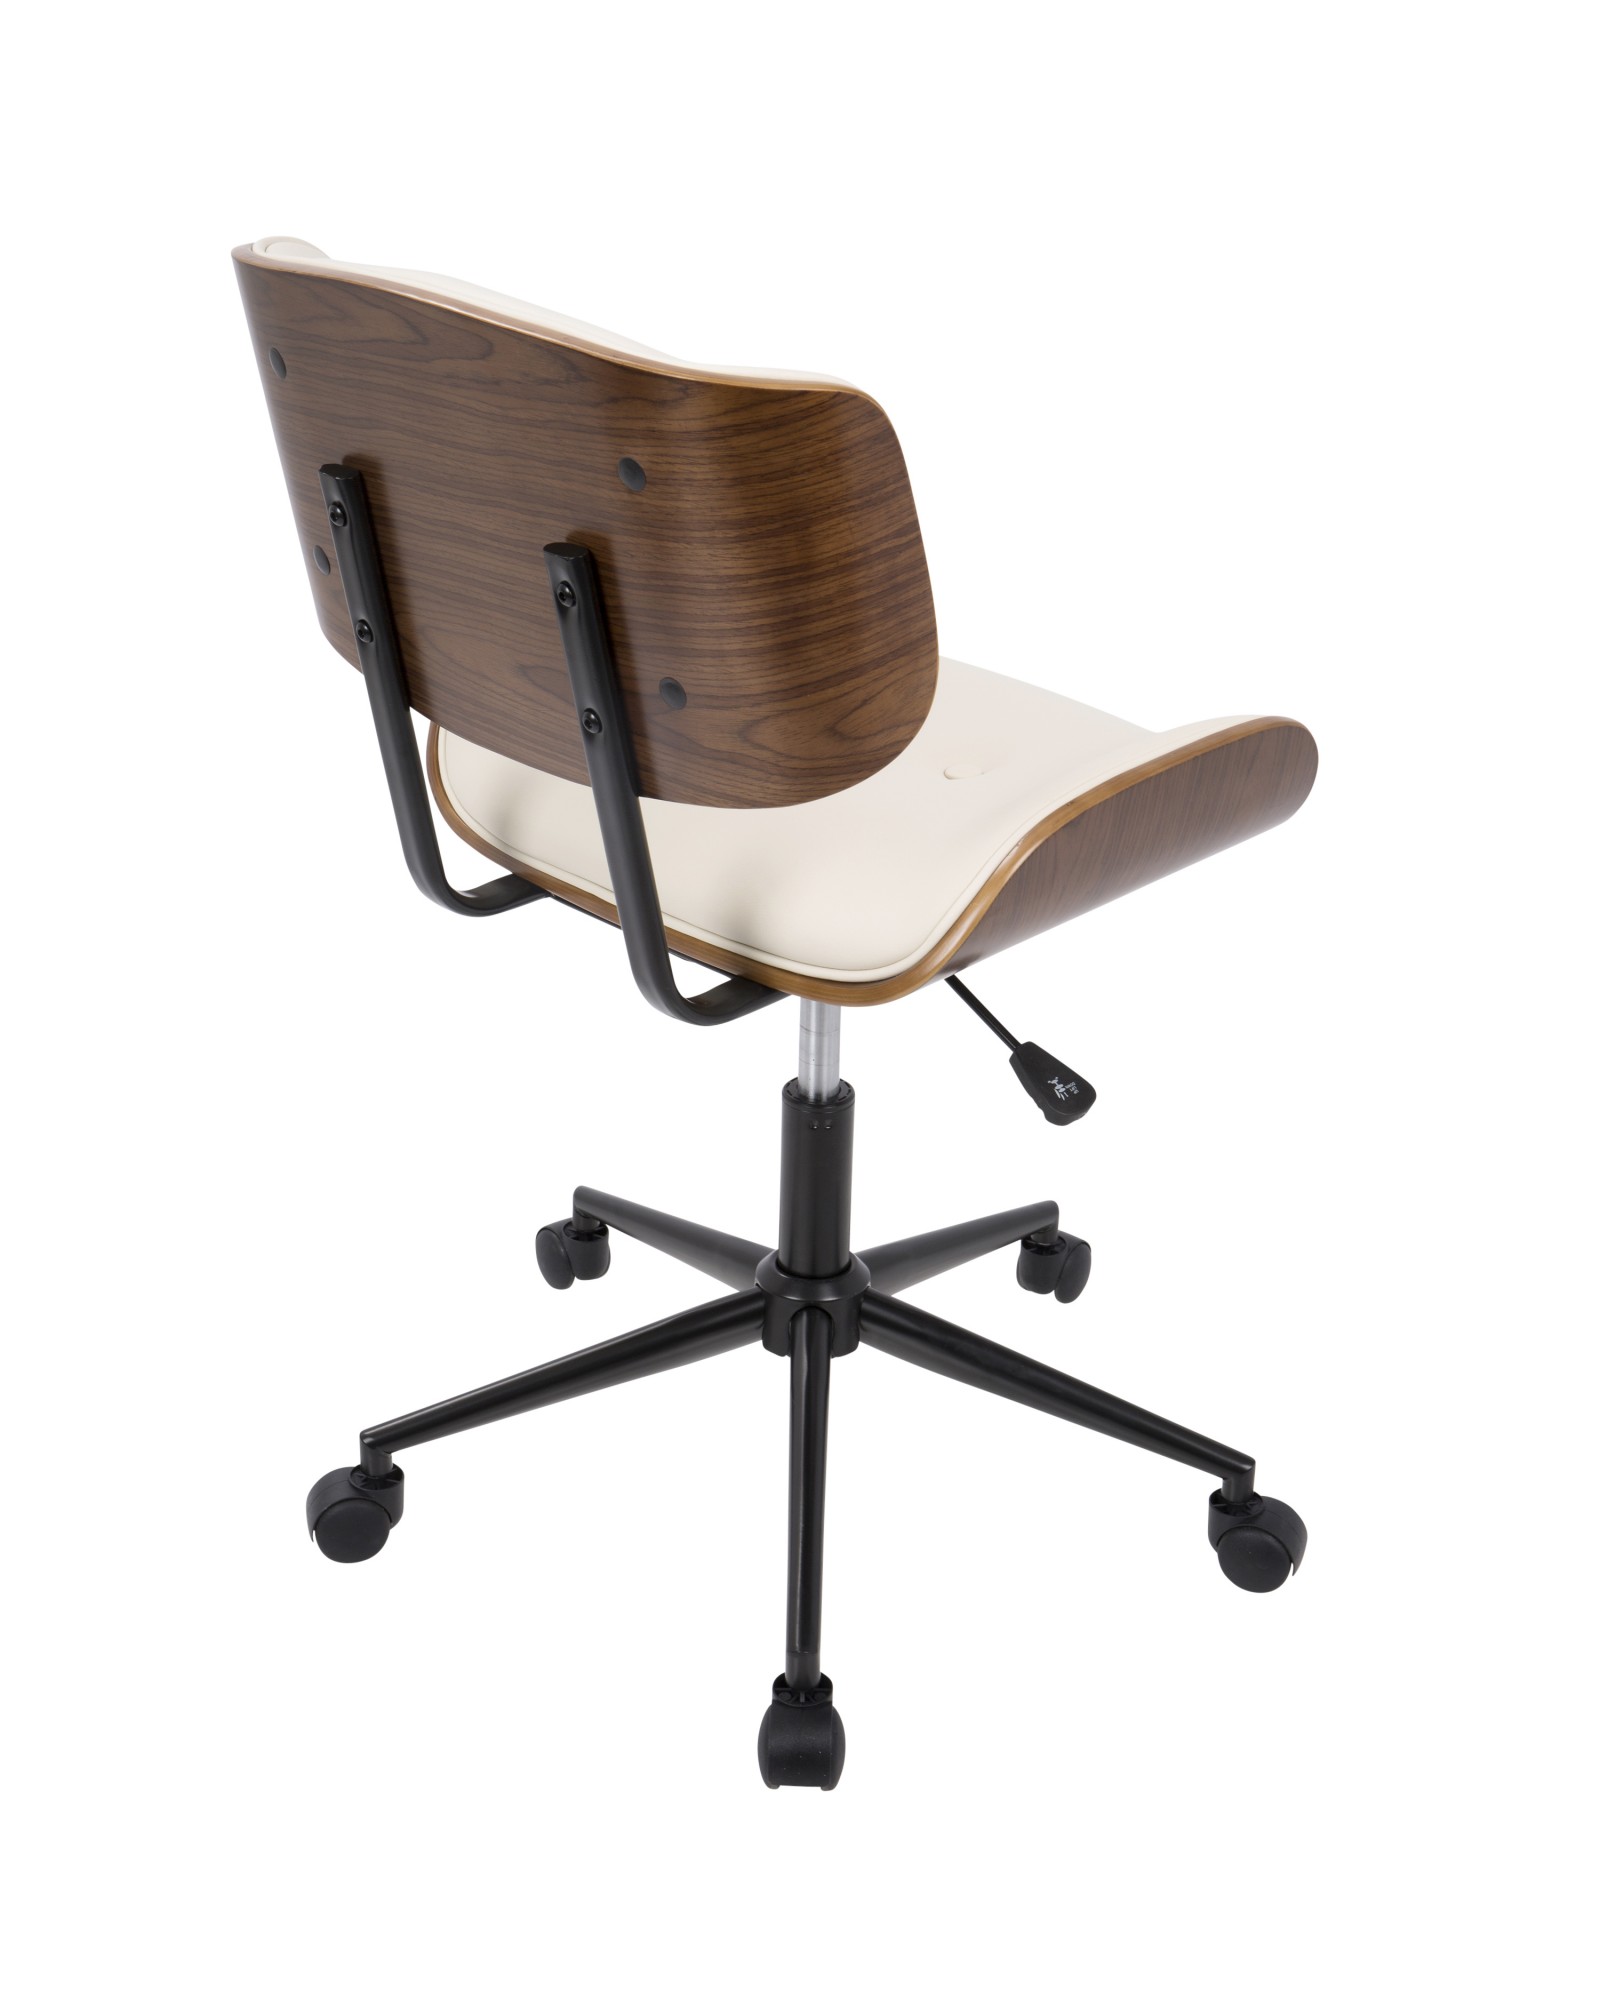 Lombardi Mid-Century Modern Adjustable Office Chair with Swivel in Walnut and Cream